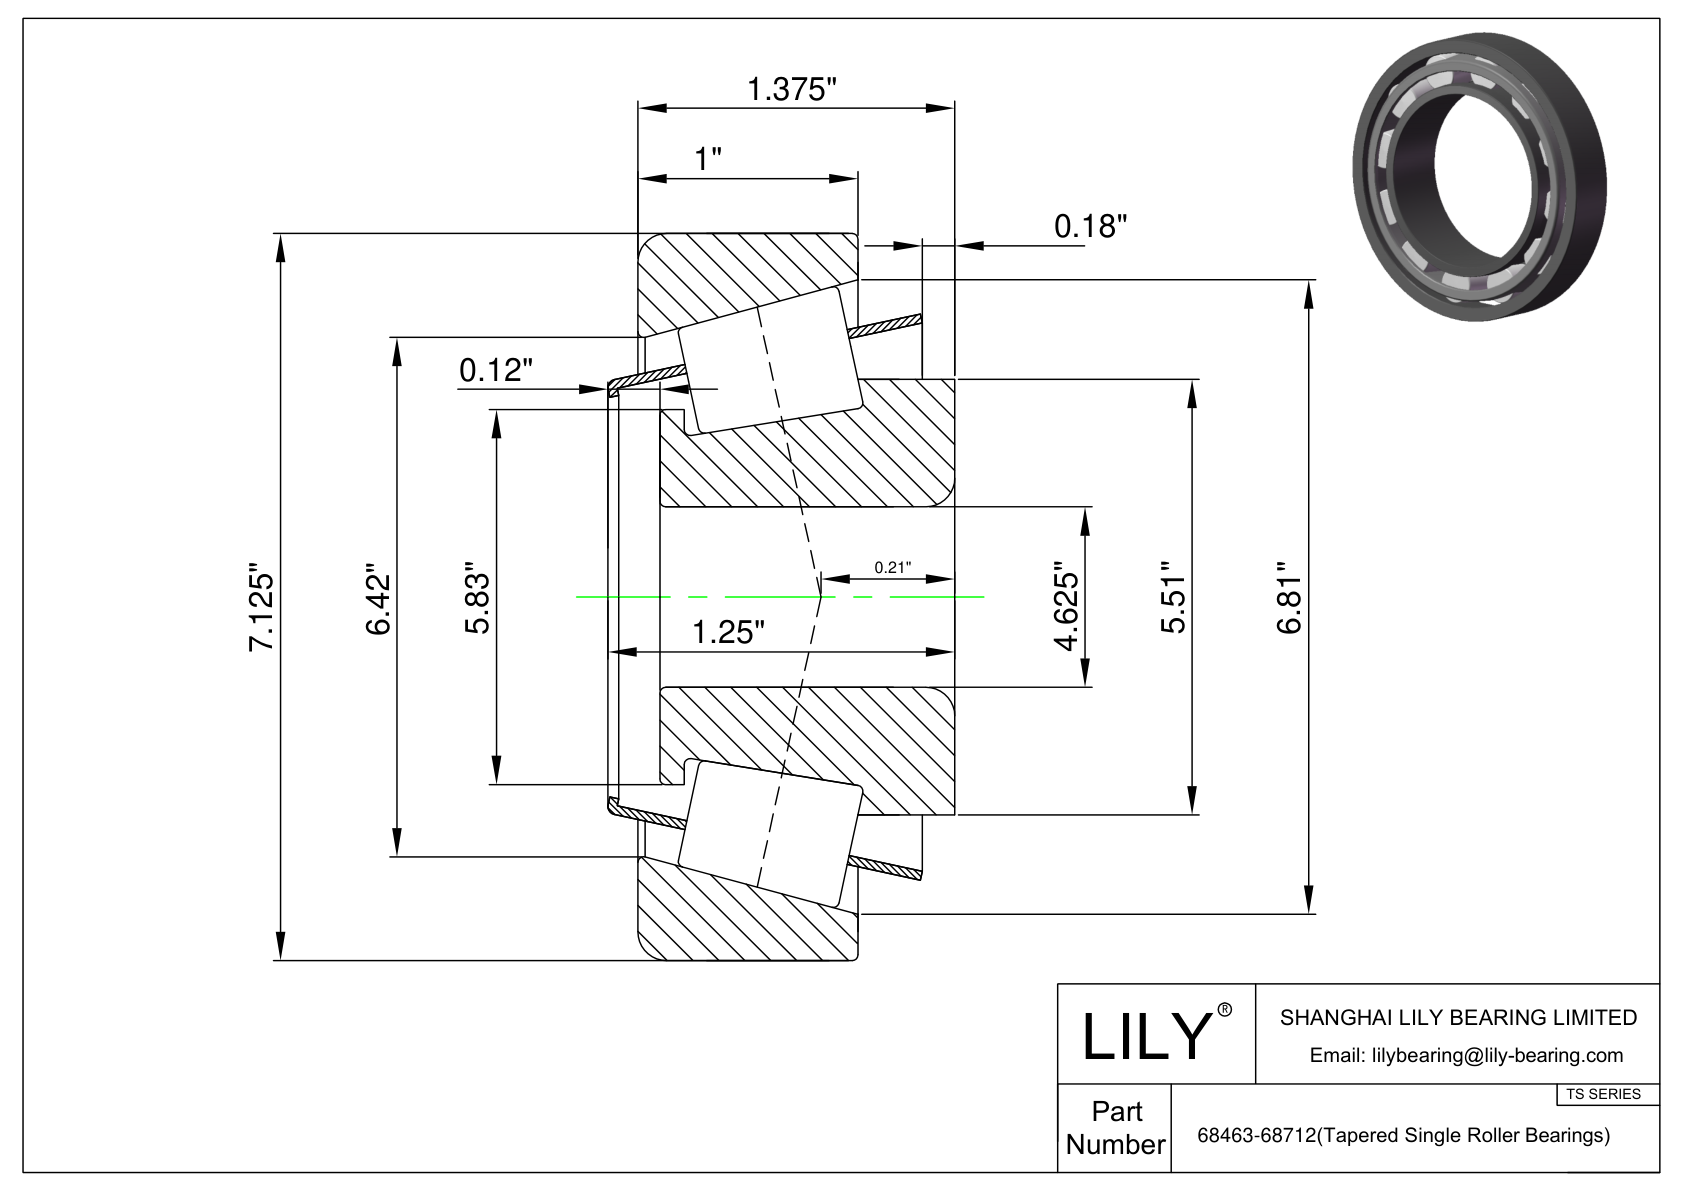 68463-68712 TS (Tapered Single Roller Bearings) (Imperial) cad drawing